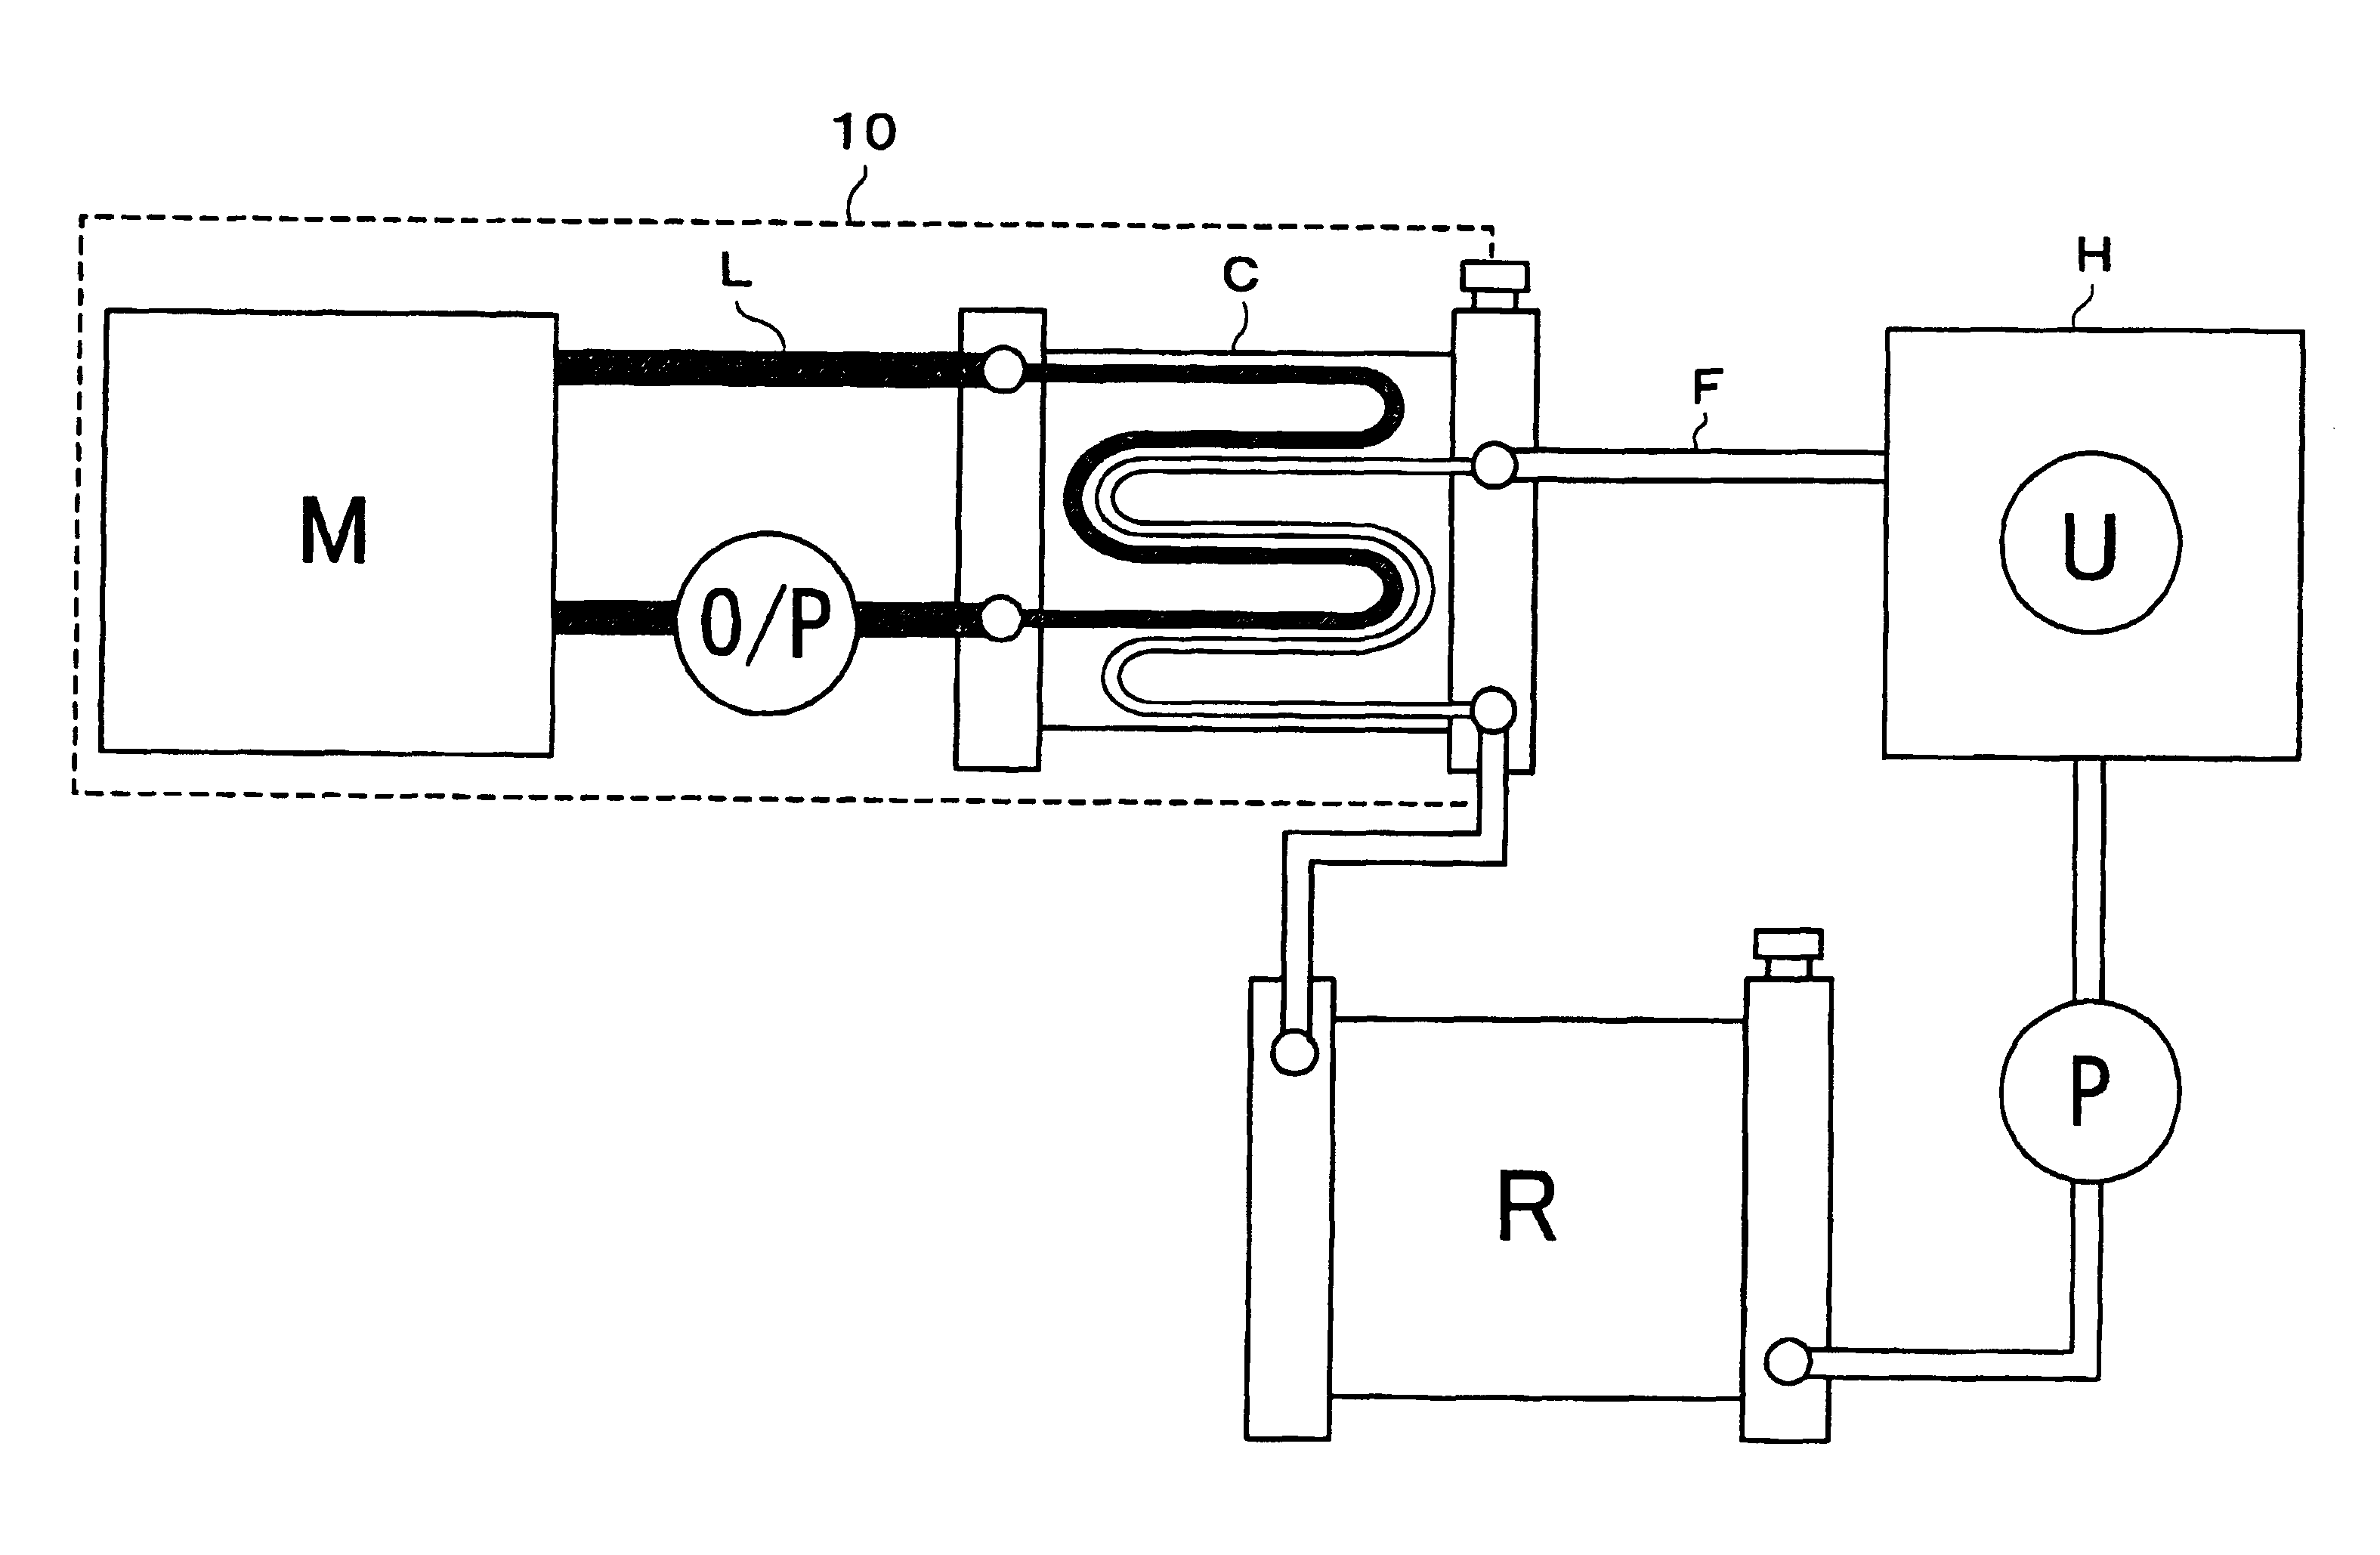 Drive unit with two coolant circuits for electric motor